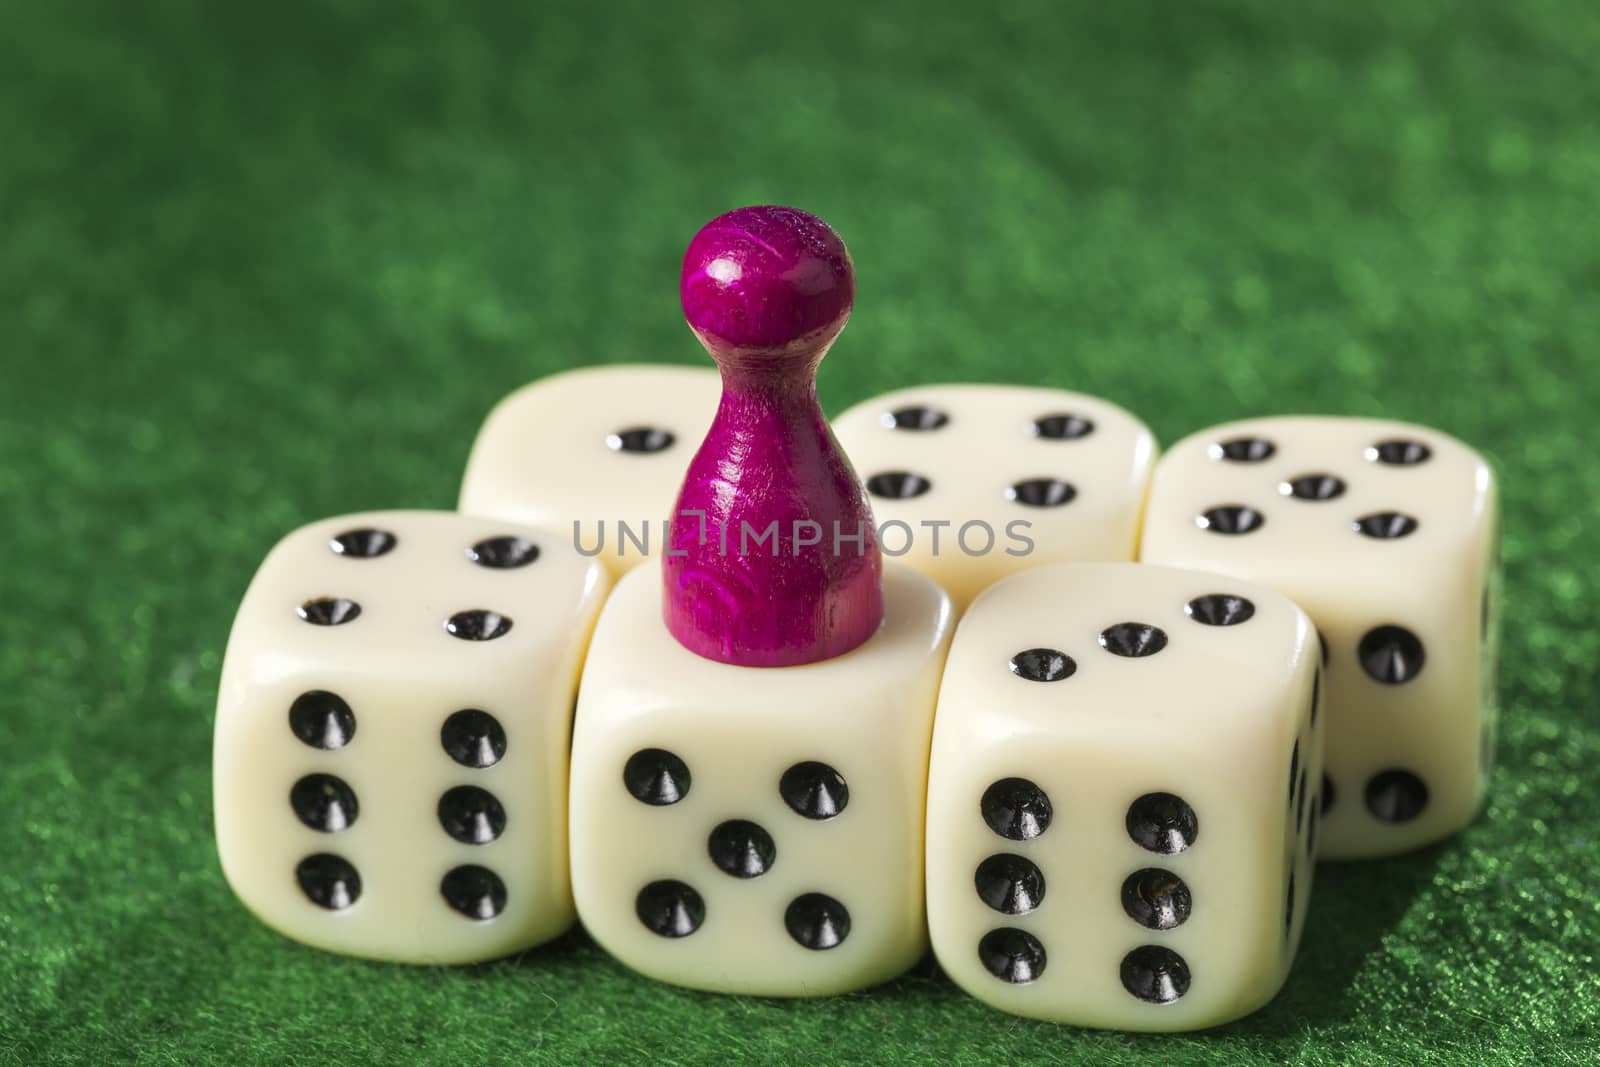 Six dices and a pawn for playing games